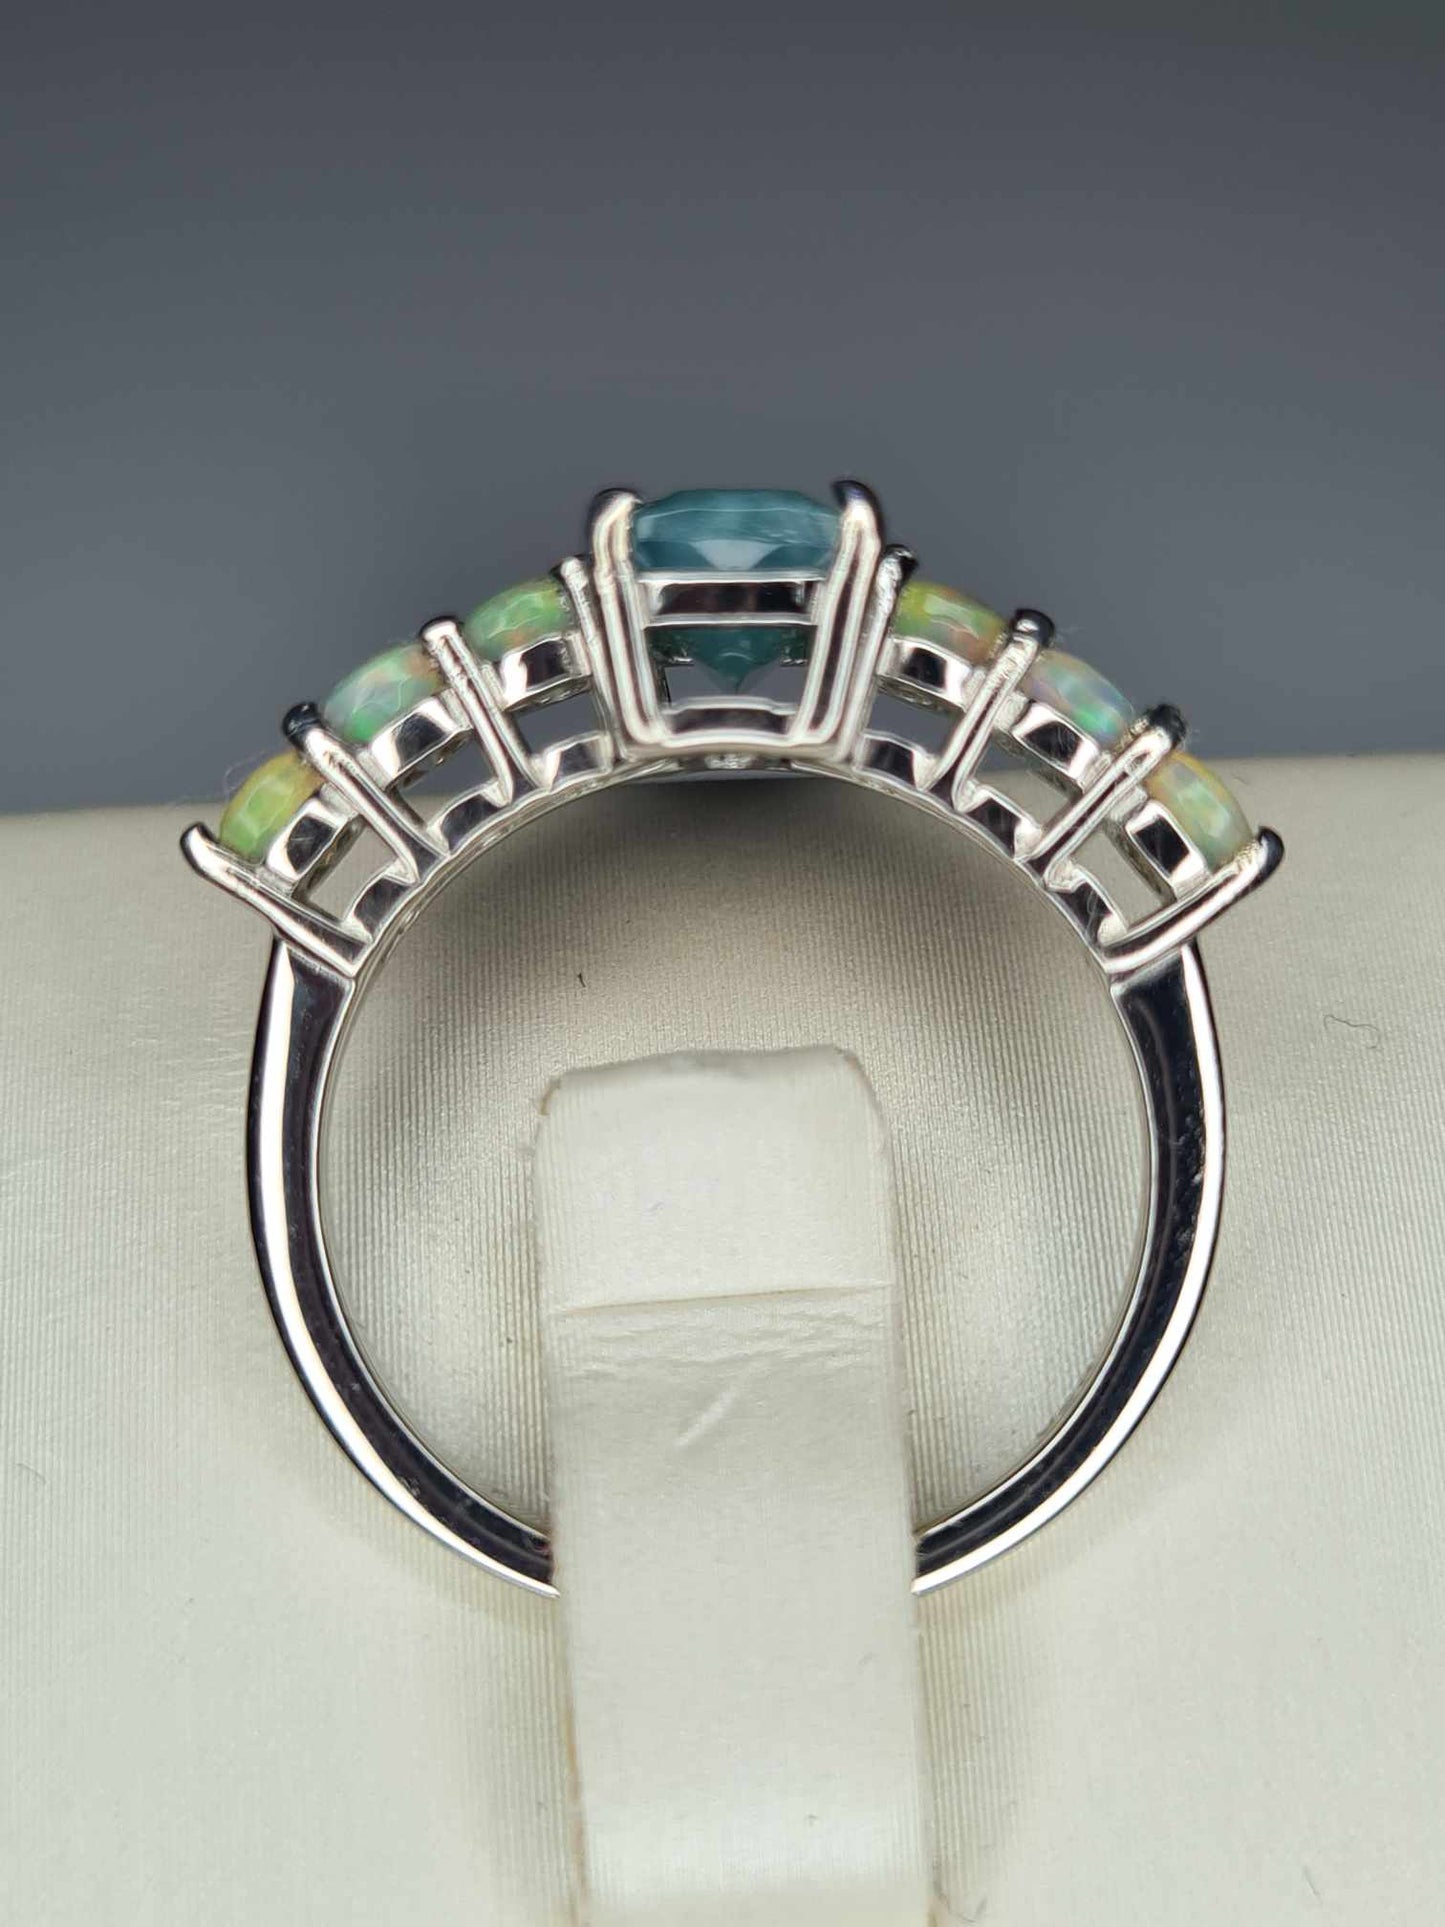 Grandidierite and Ethiopian Welo Opal 7 Stone Ring in Platinum Overlay Sterling Silver SIZES L,Q